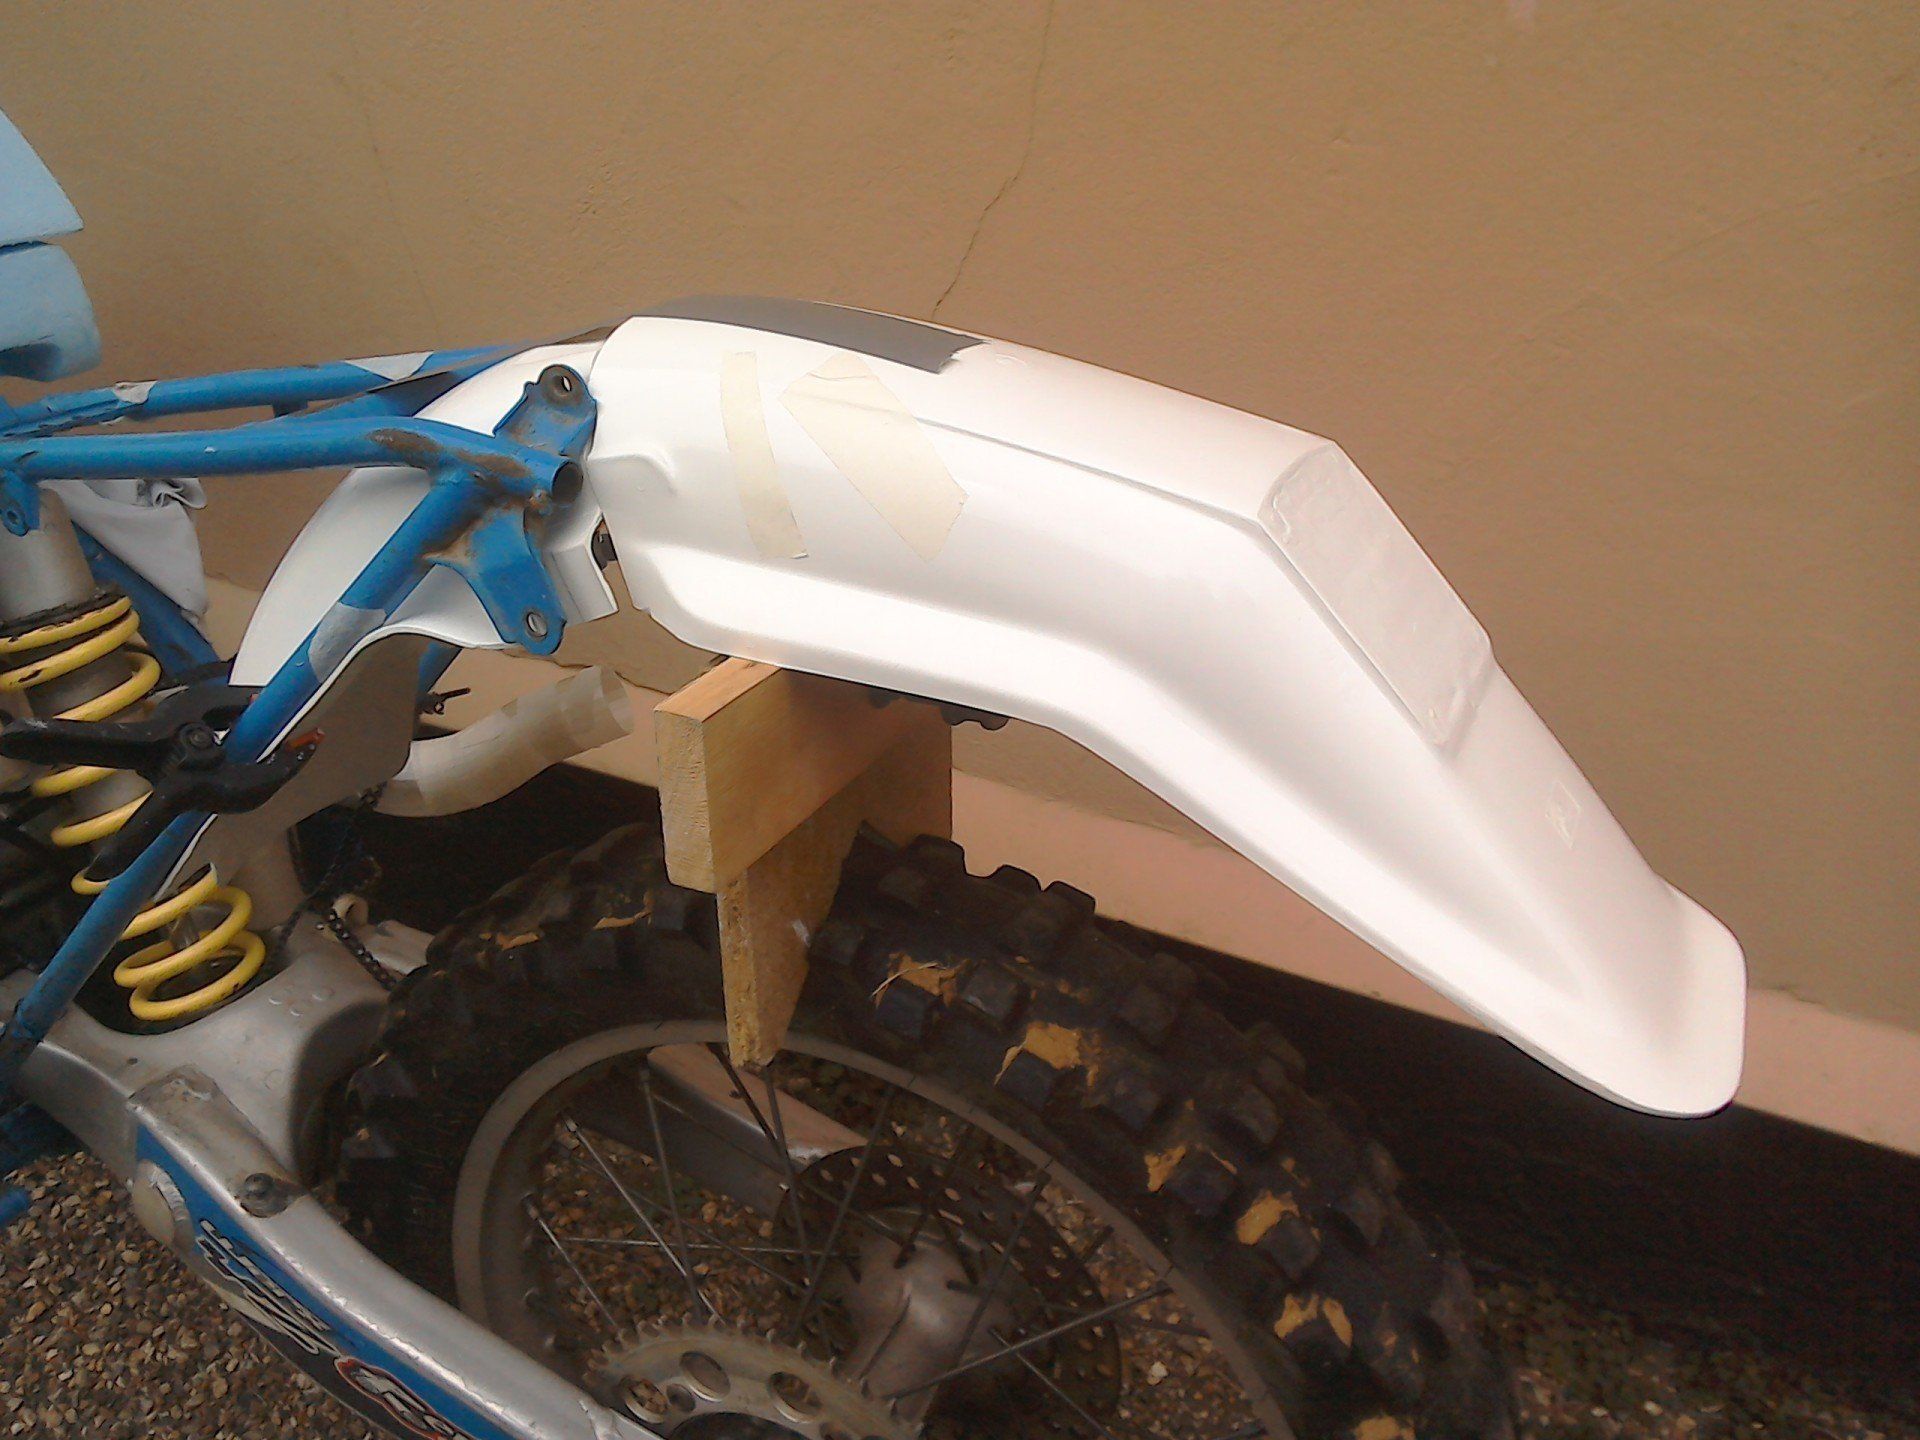 Joining two GRP mudguards